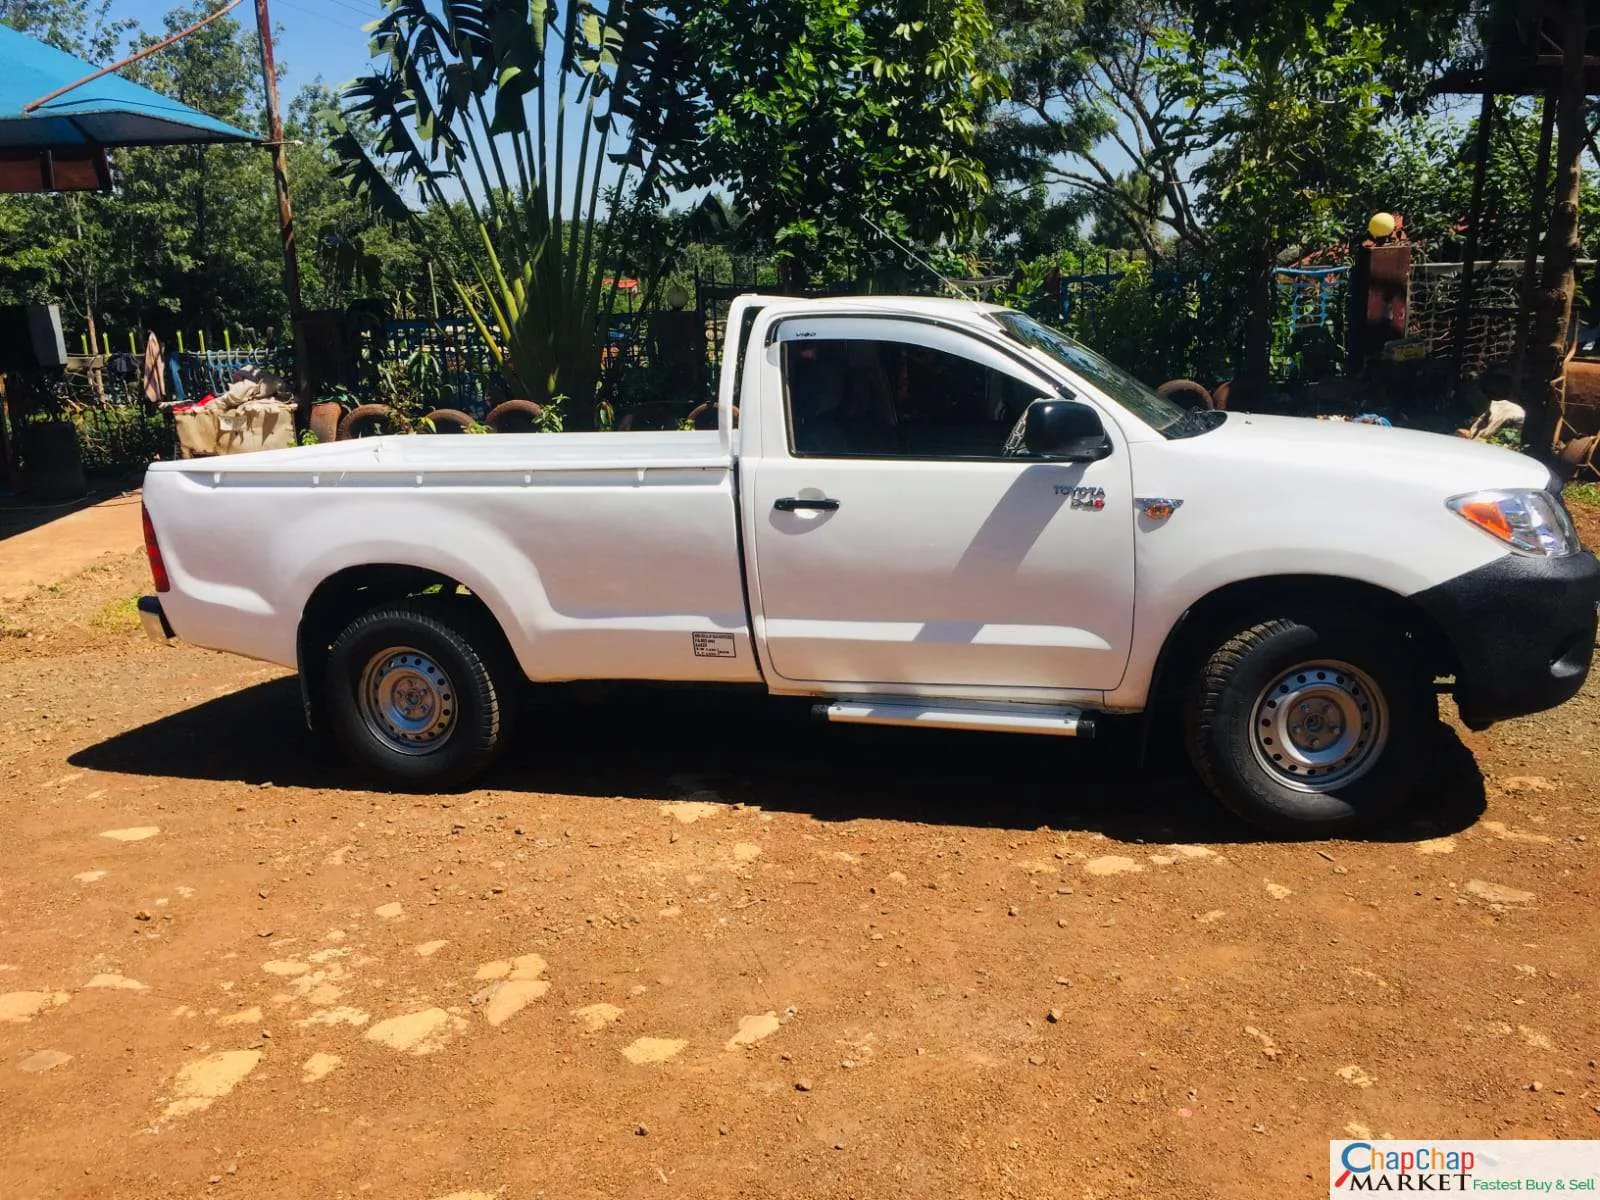 Cars Cars For Sale-Toyota Hilux Kenya single cab You Paul 40% Deposit trade in OK Toyota Hilux for sale in kenya hire purchase installments EXCLUSIVE 8